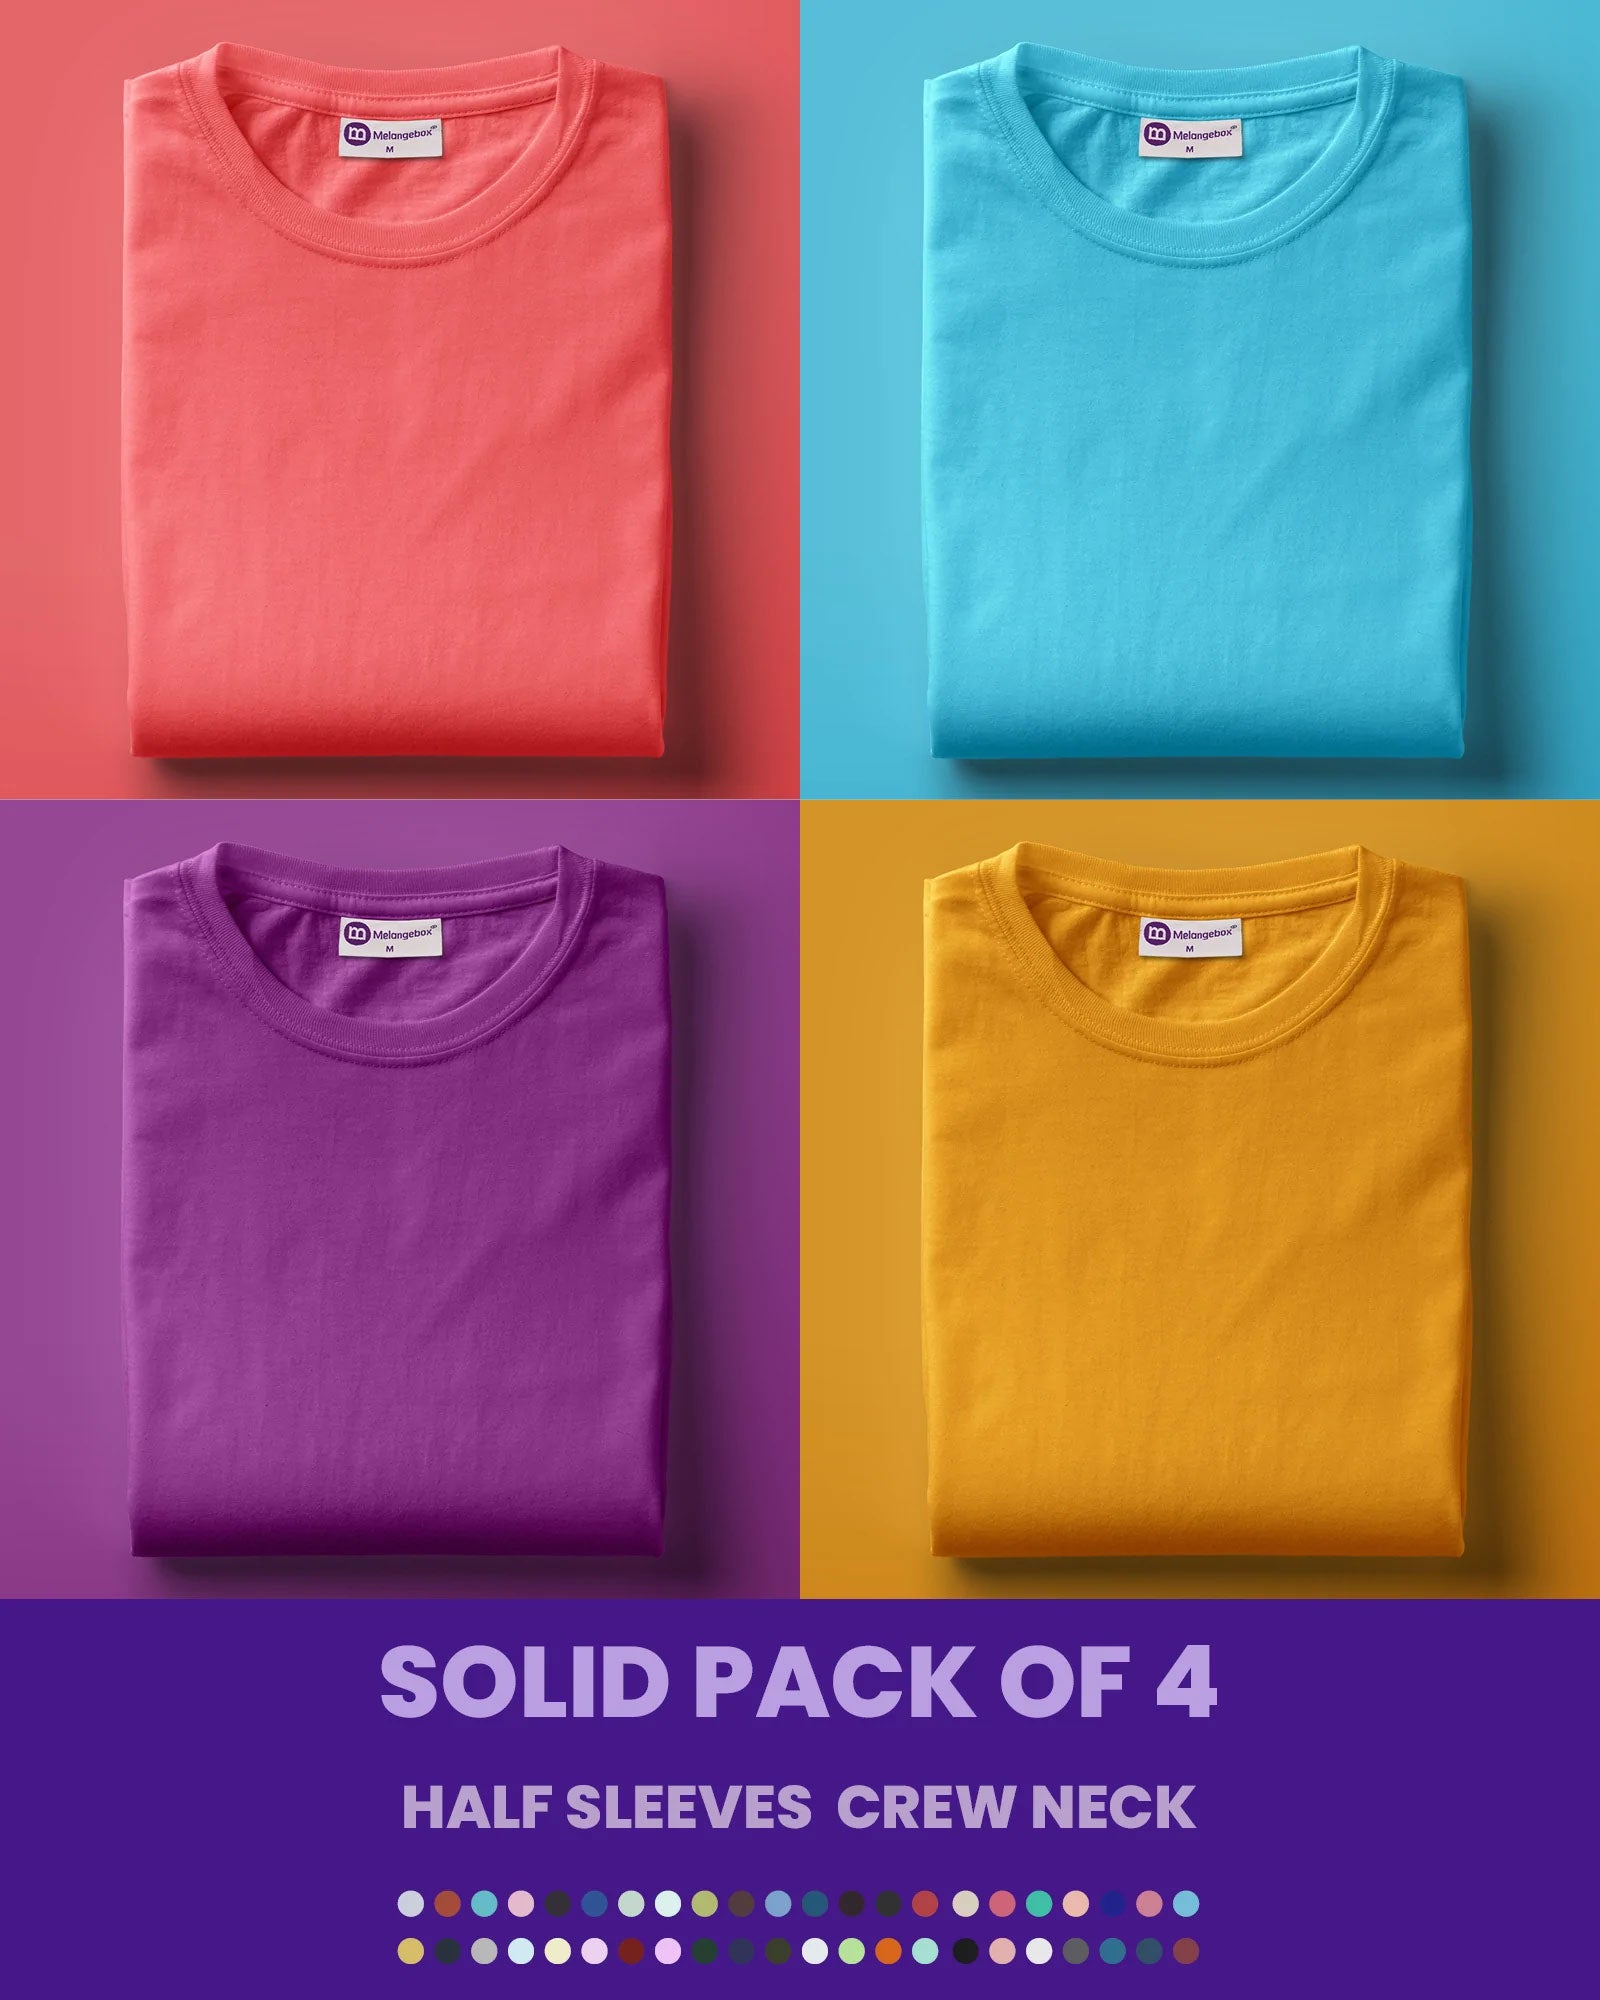 Solid Pack of 4: Half Sleeves Crew Neck